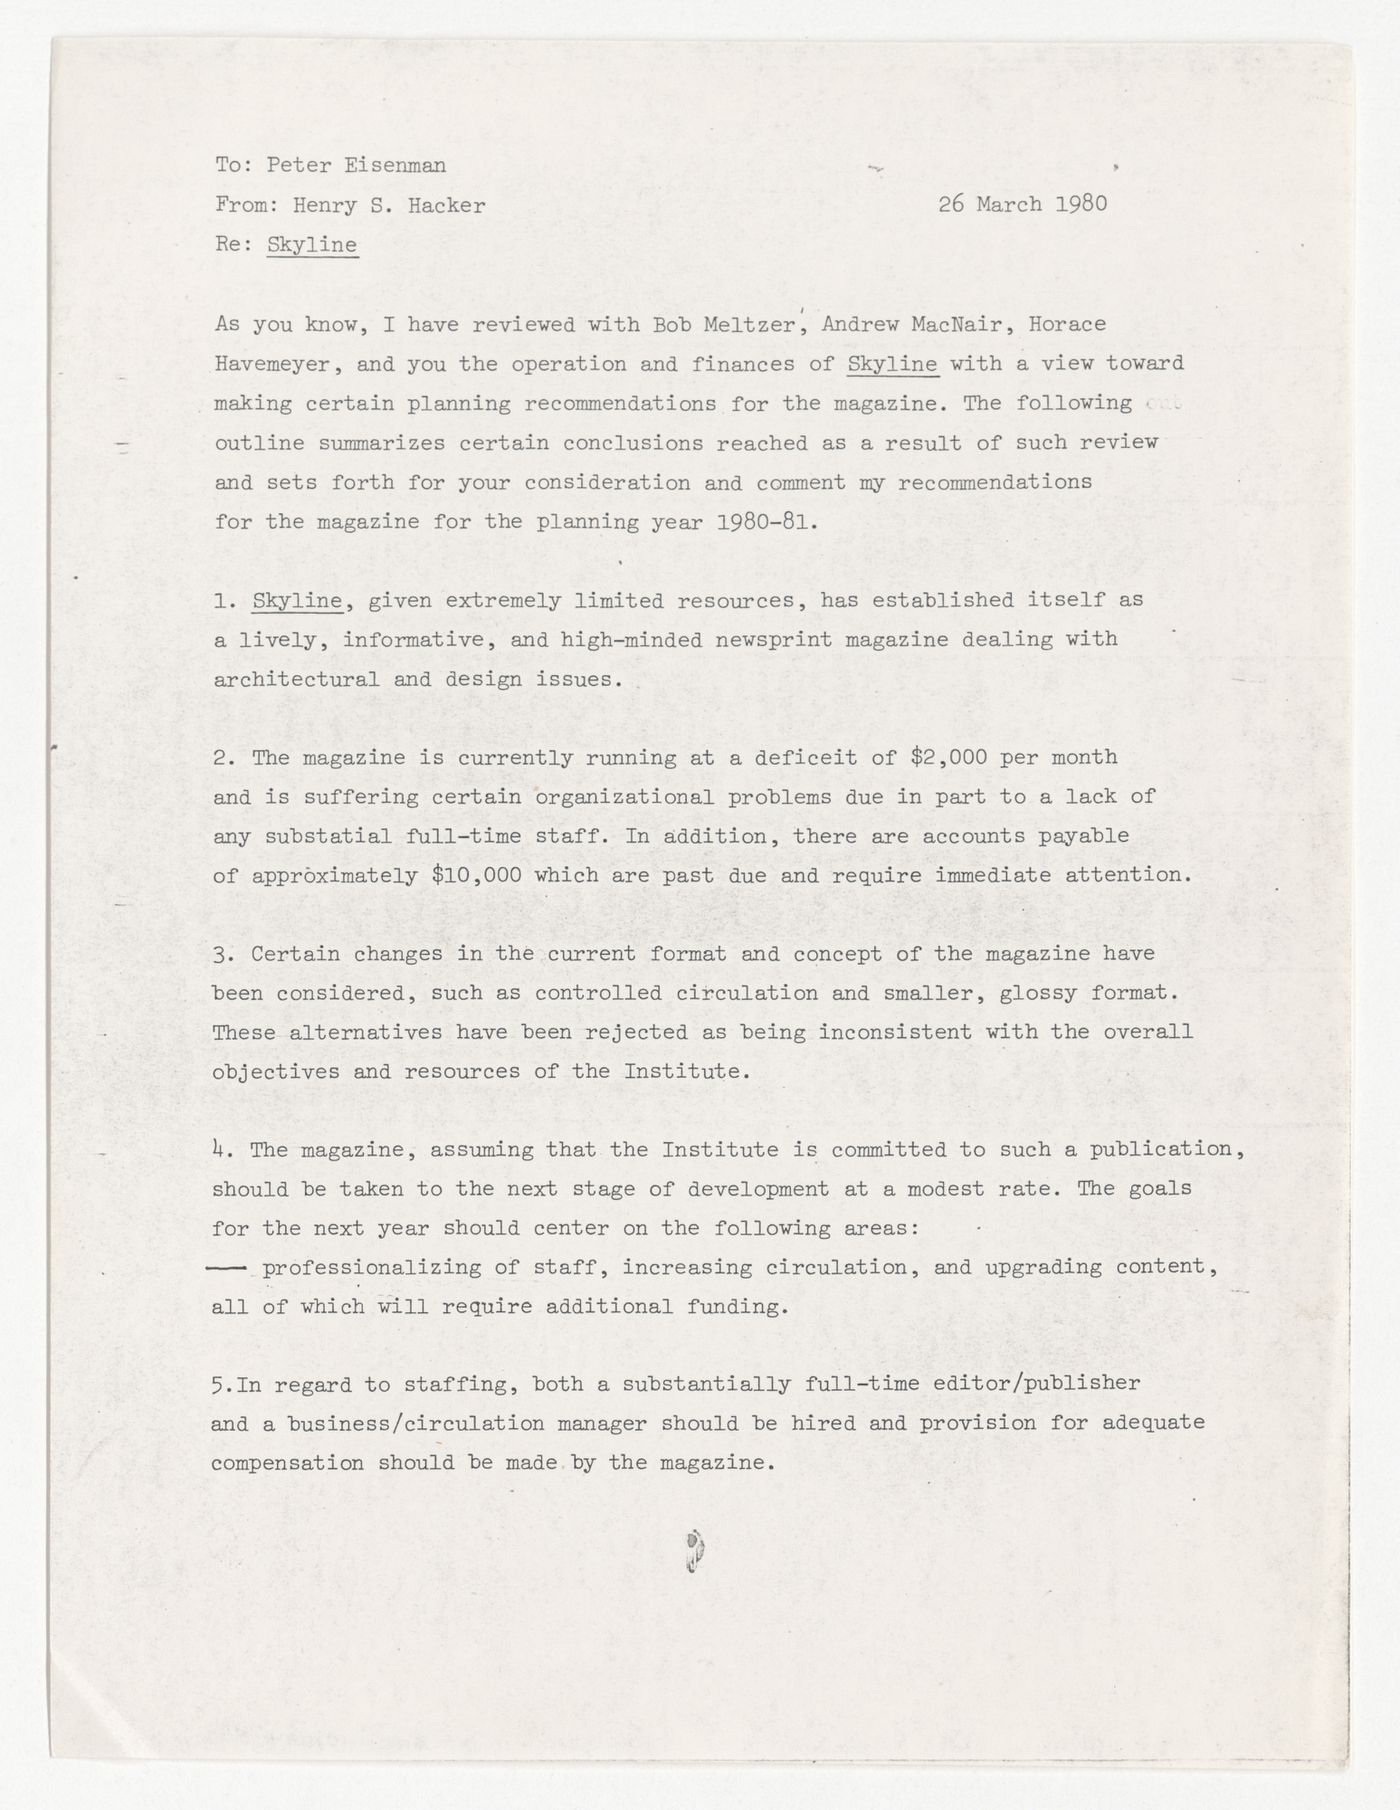 Memorandum from Henry S. Hacker to Peter D. Eisenman about planning recommendations for Skyline